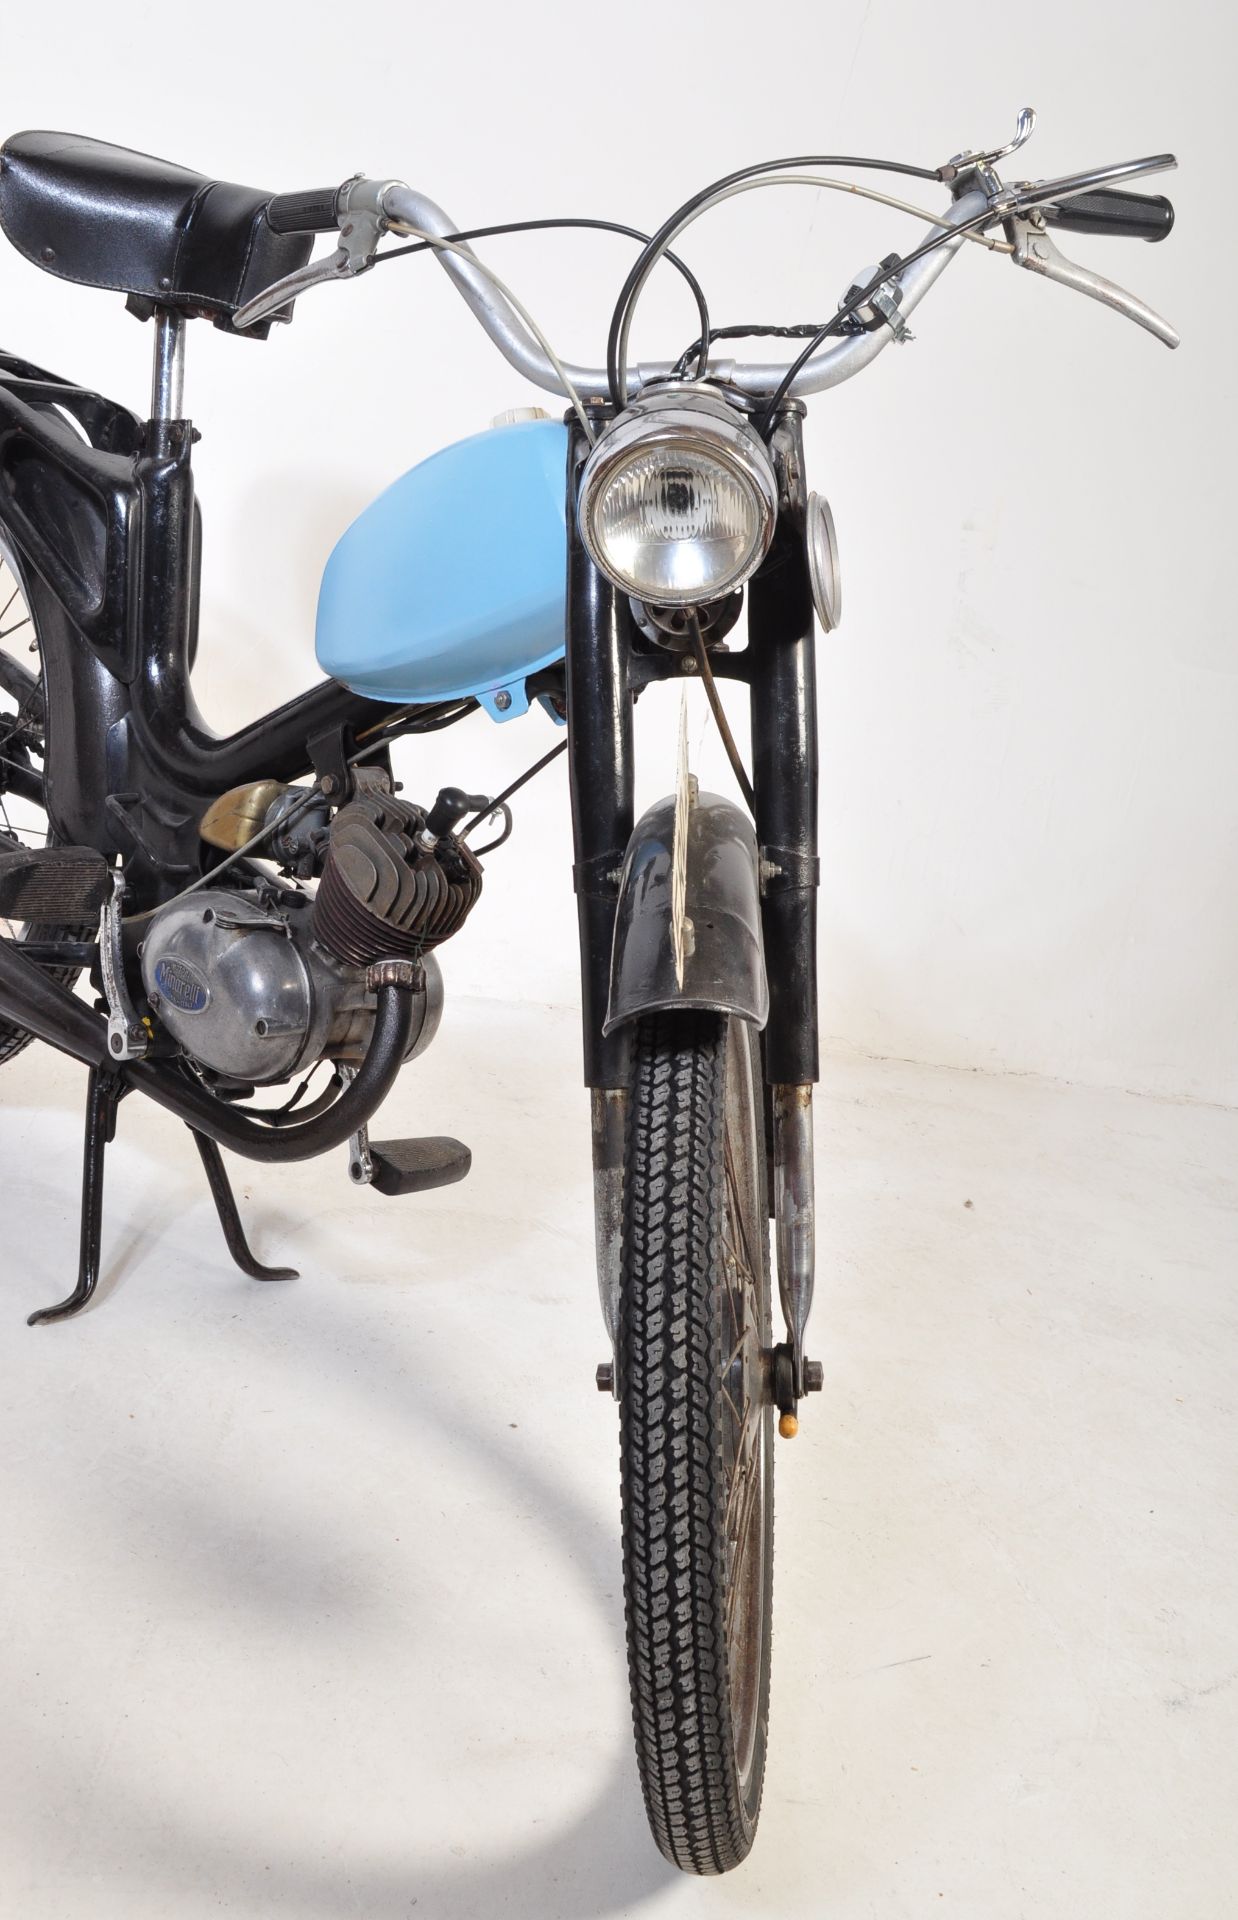 1965 49CC KERRY CAPITANO DELUXE AUTOMATIC MOTORCYCLE - Image 18 of 21